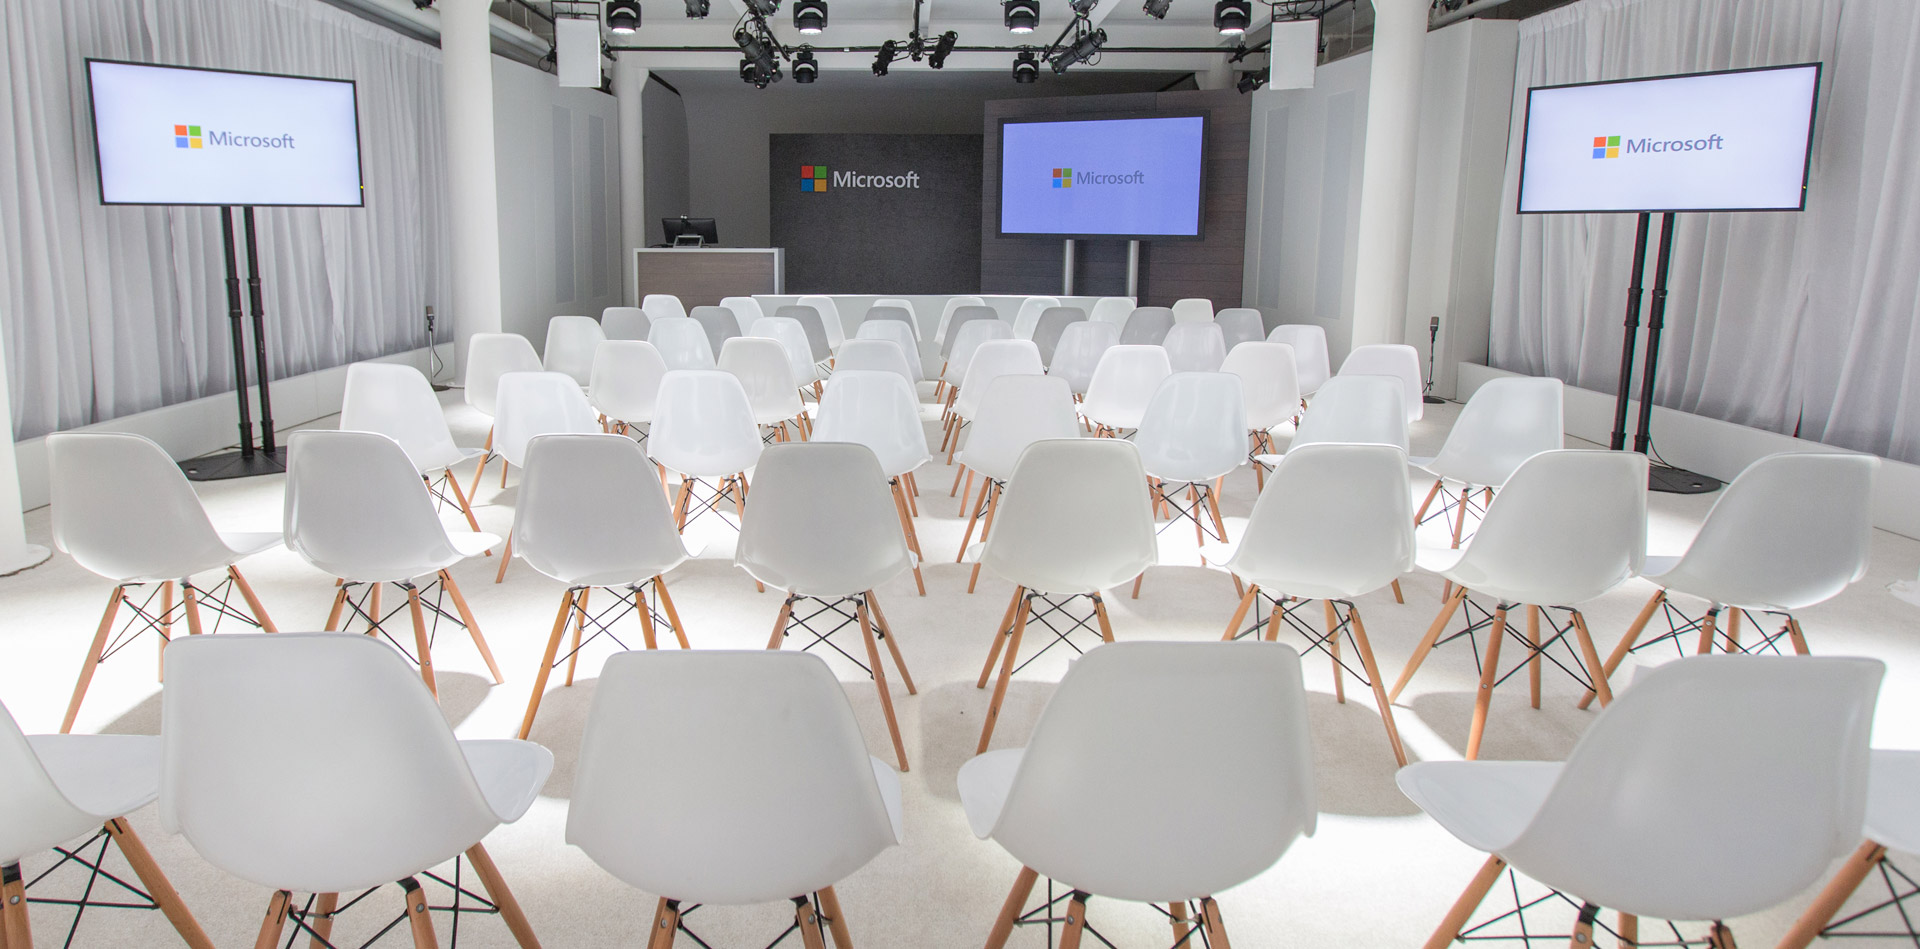 Conference room with white chairs and multiple screens with the Microsoft brand.